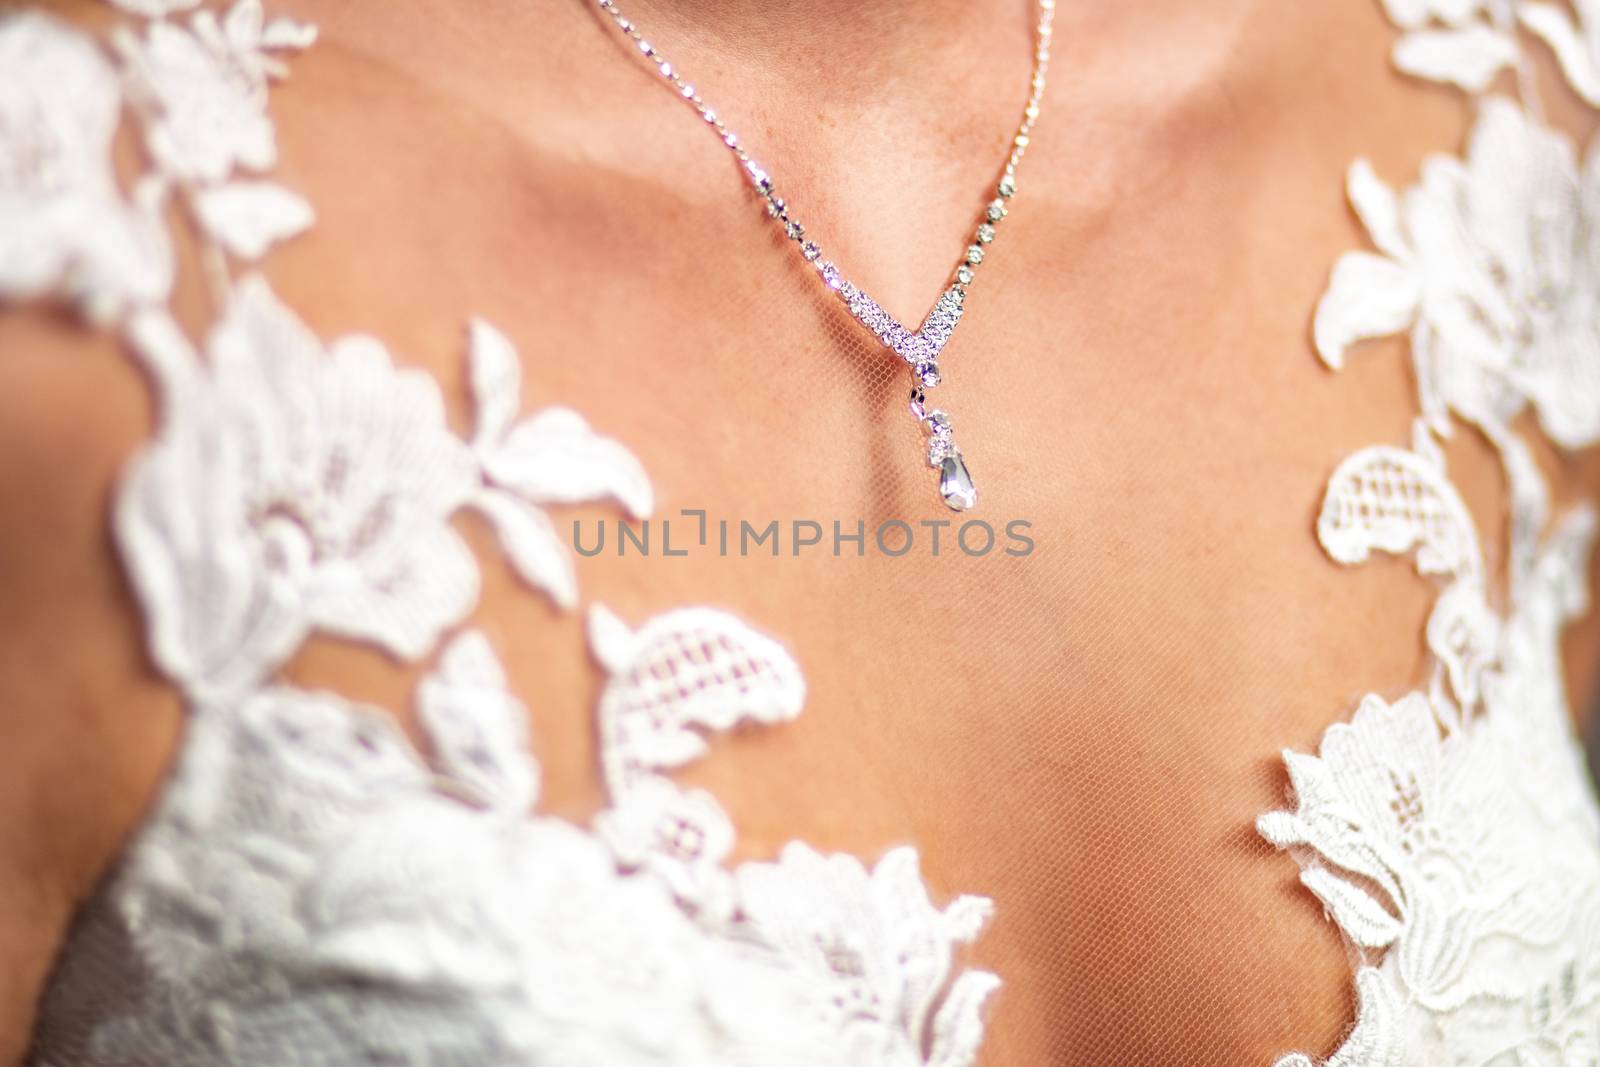 cleavage bride necklace jewelry dress breasts wedding by timwit